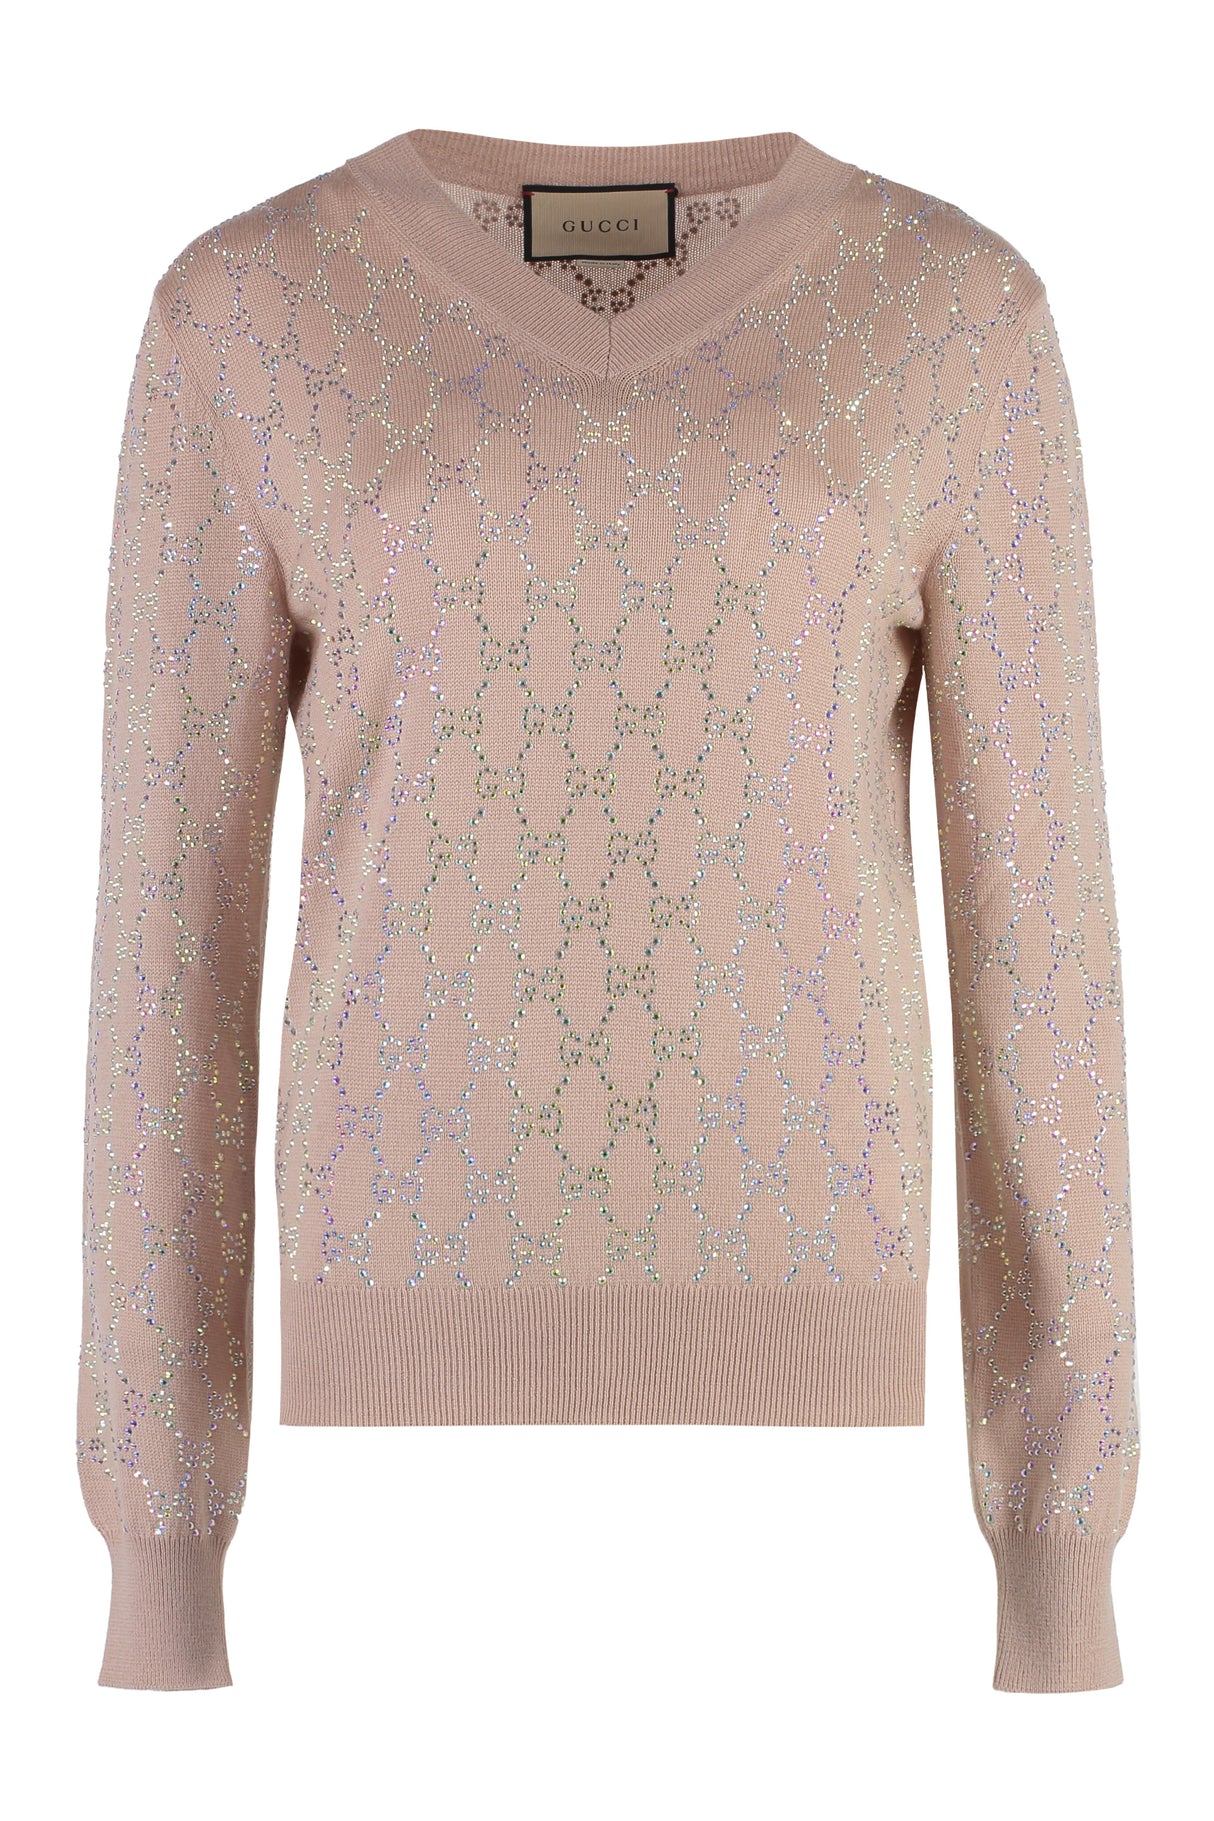 GUCCI Luxury Pale Pink Wool V-Neck Sweater with Crystal Details